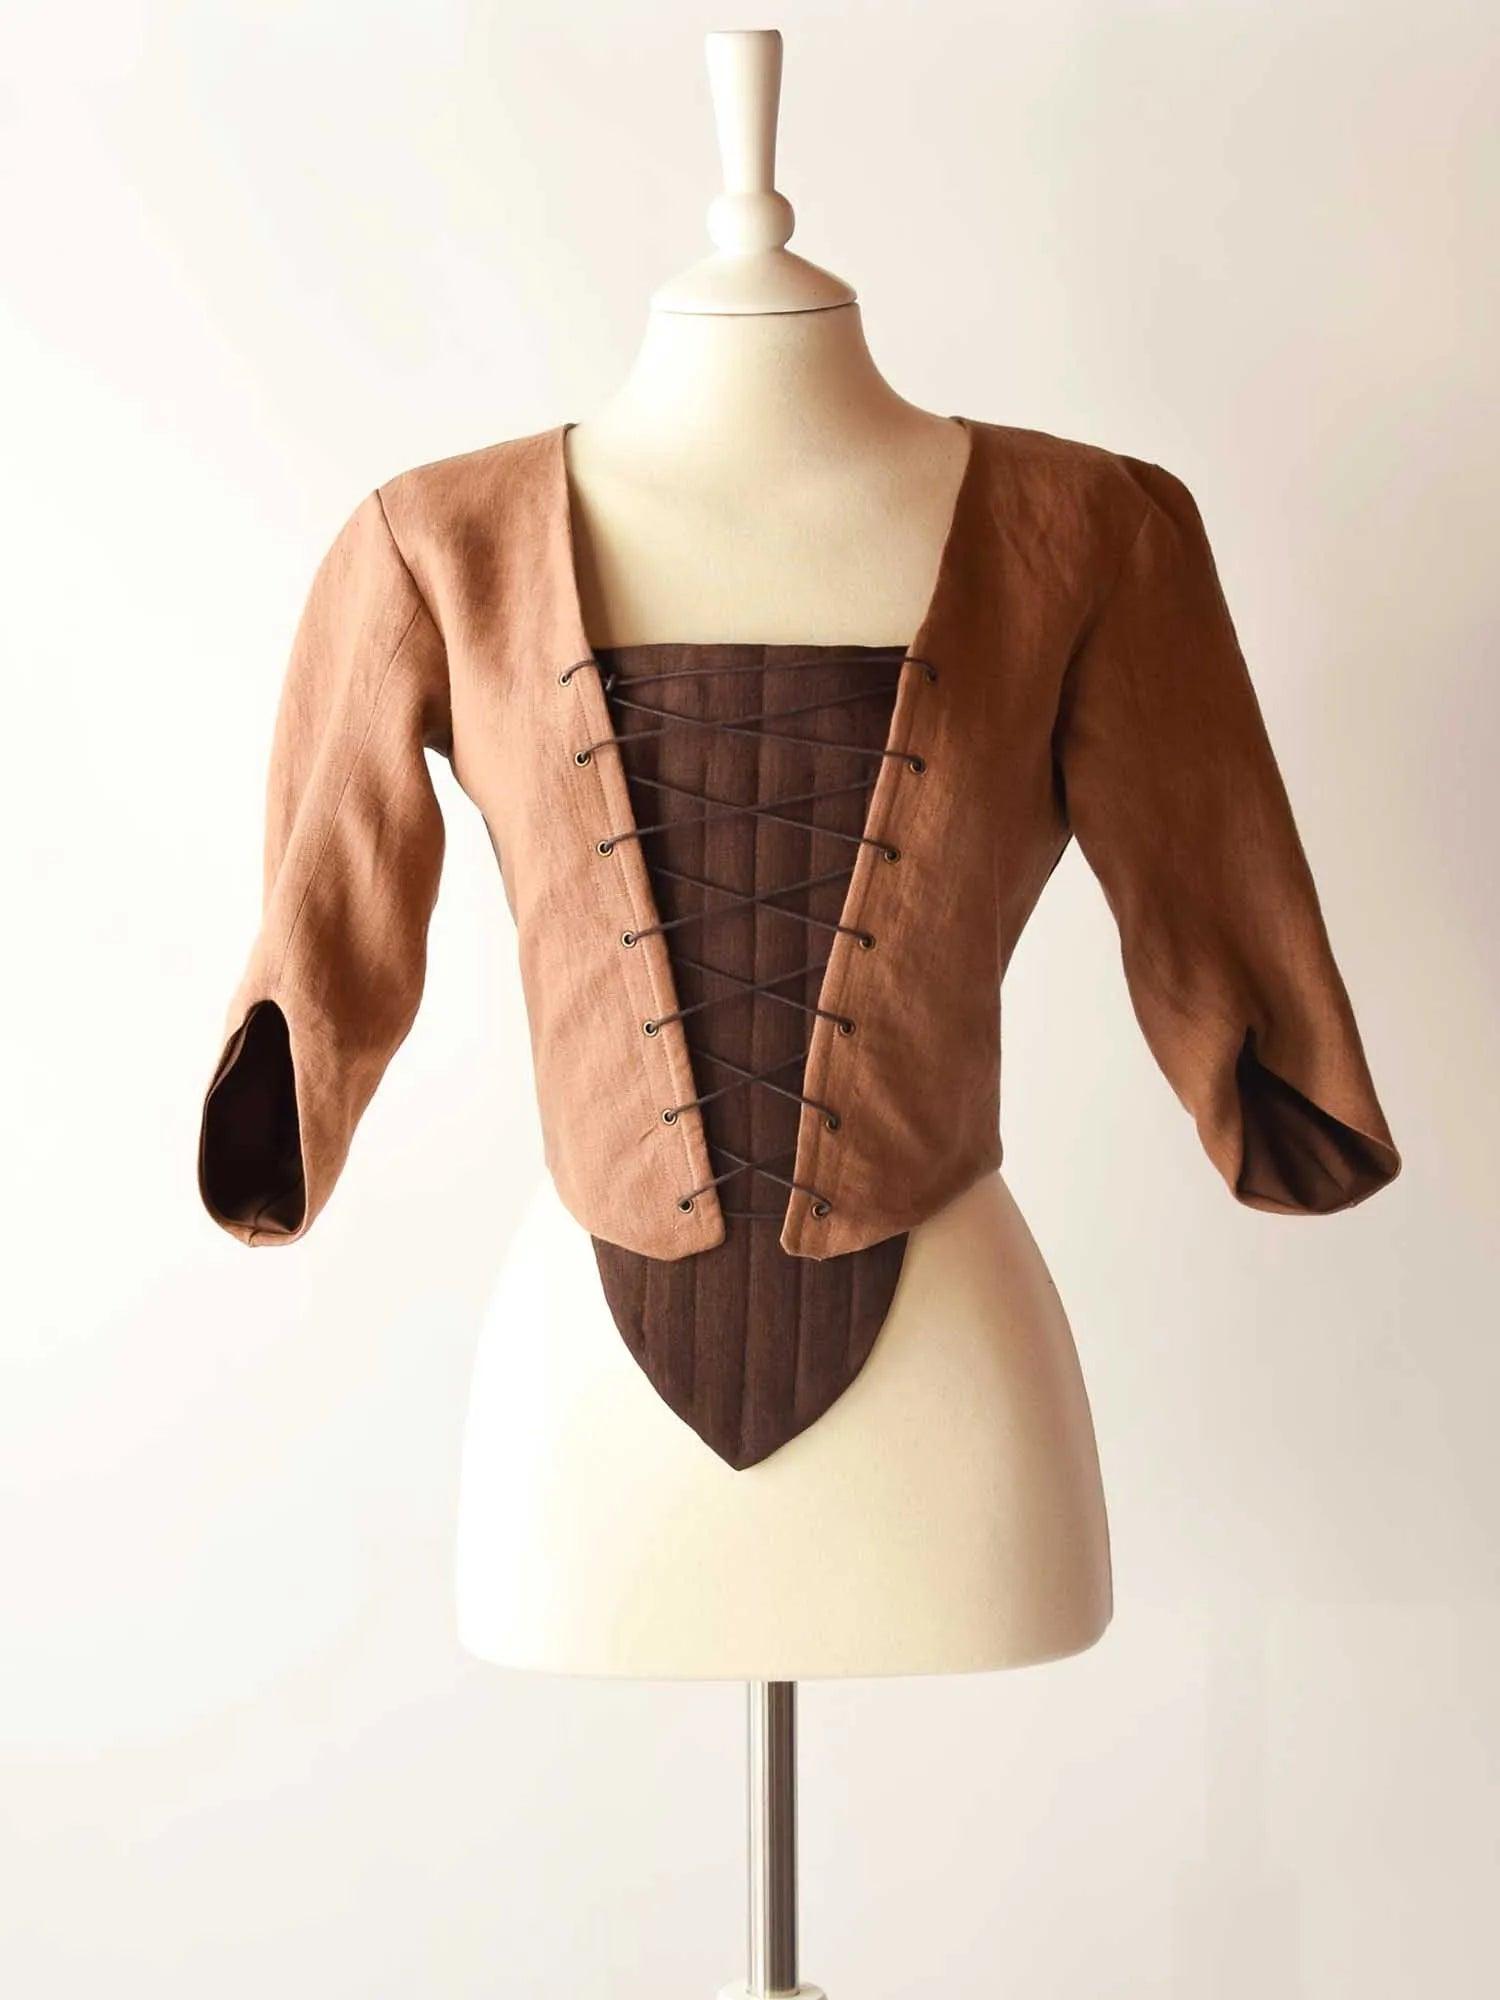 Lace-Up Bodice in Toffee Linen - Atelier Serraspina